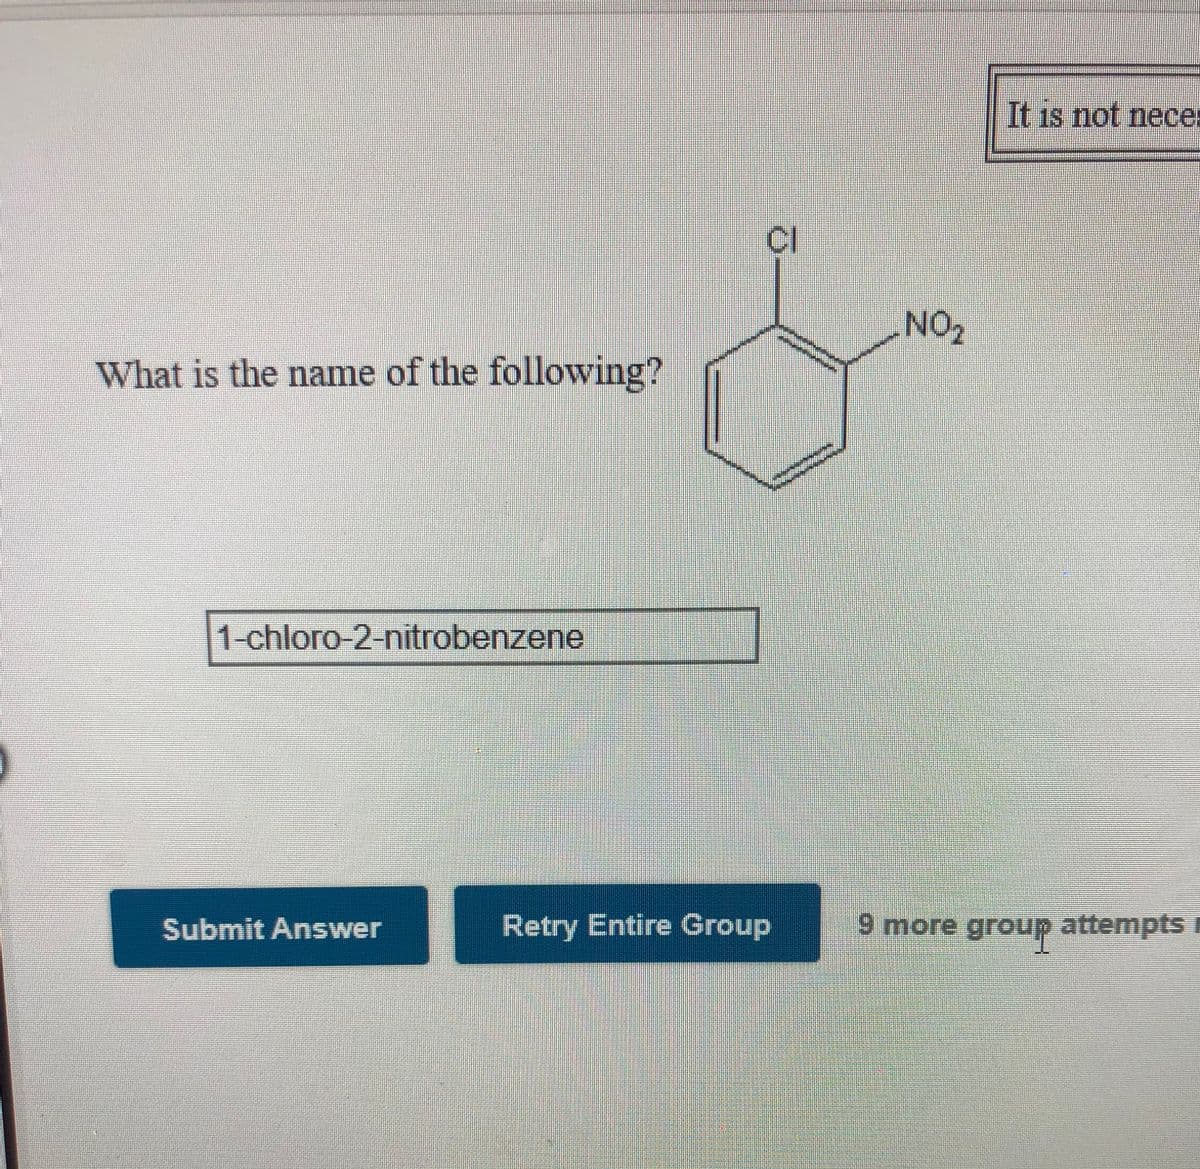 It is not neces
Cl
NO2
What is the name of the following?
1-chloro-2-nitrobenzene
Submit Answer
Retry Entire Group
9 more group attempts
